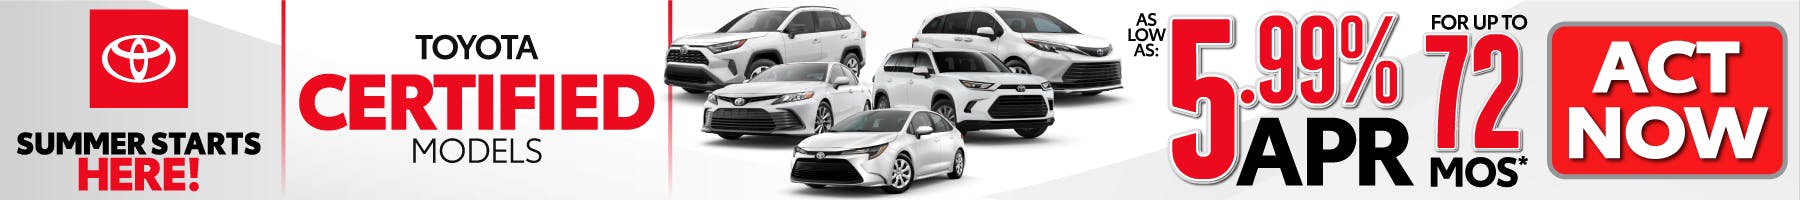 Toyota Certified Models – As low as 5.99% APR for up to 72 months* – Act Now – May3 | Miller Toyota